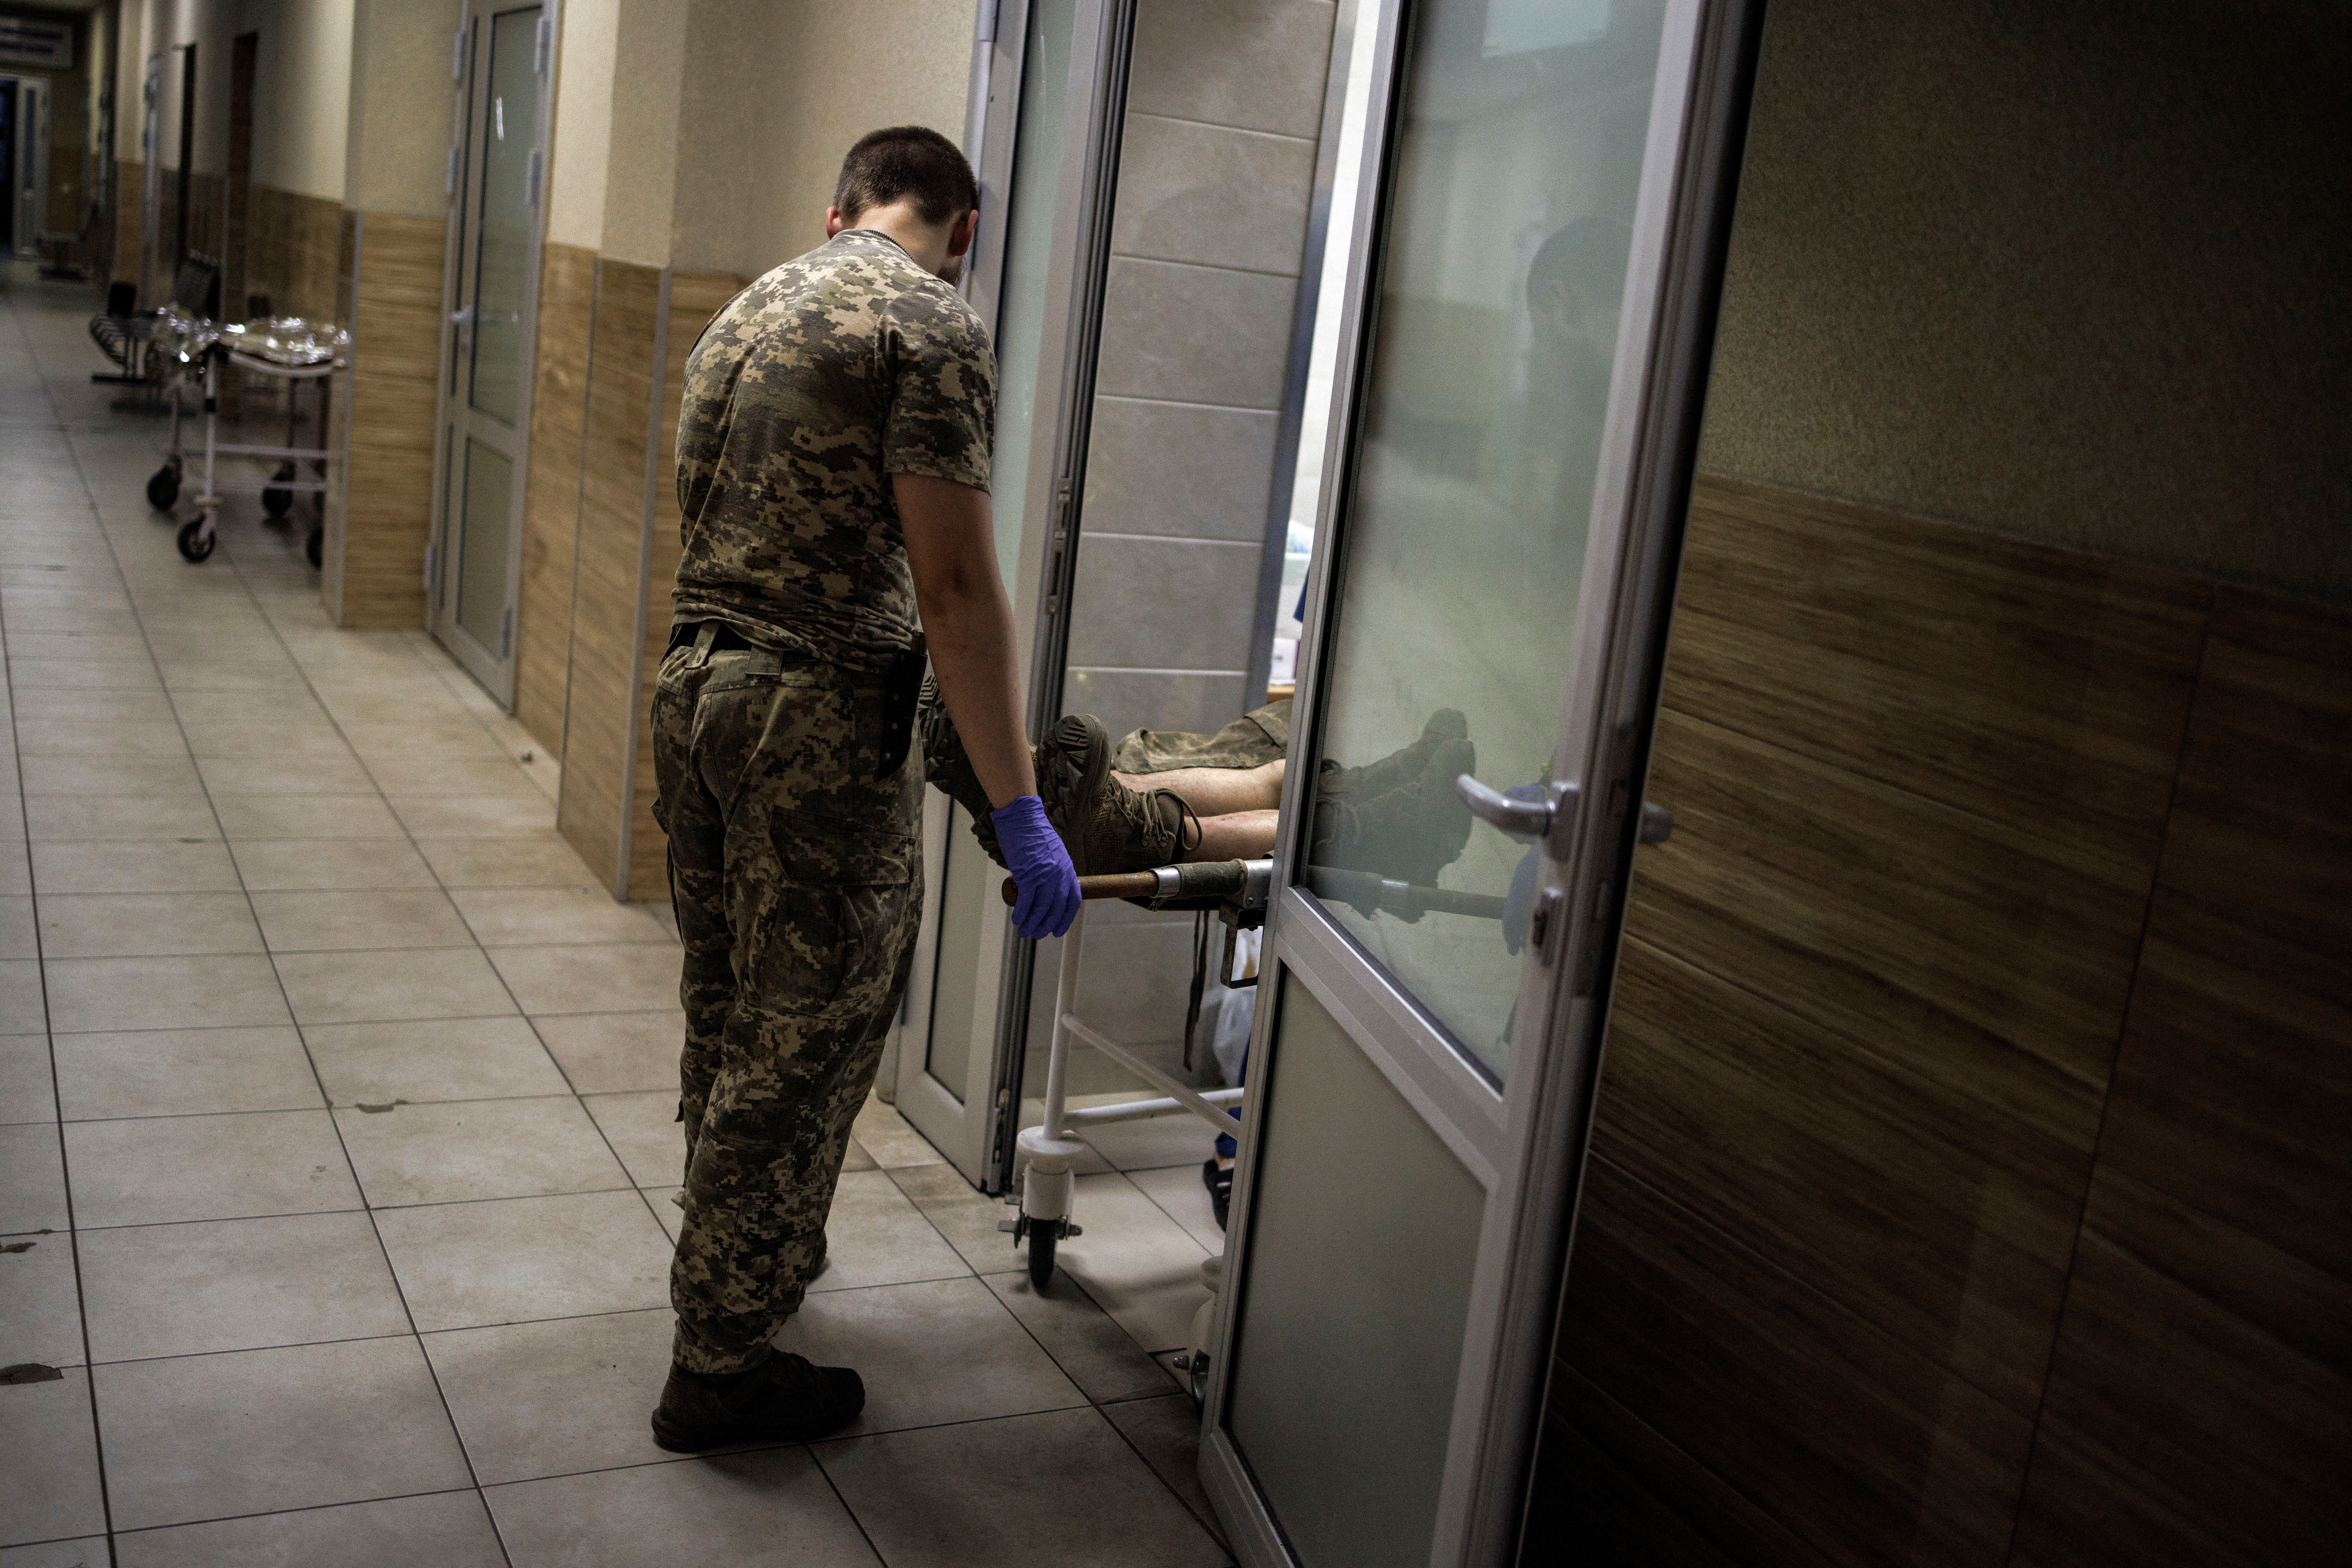 Doctors treat wounded soldiers at a frontline military hospital in Donetsk region, as Russia's attack on Ukraine continues